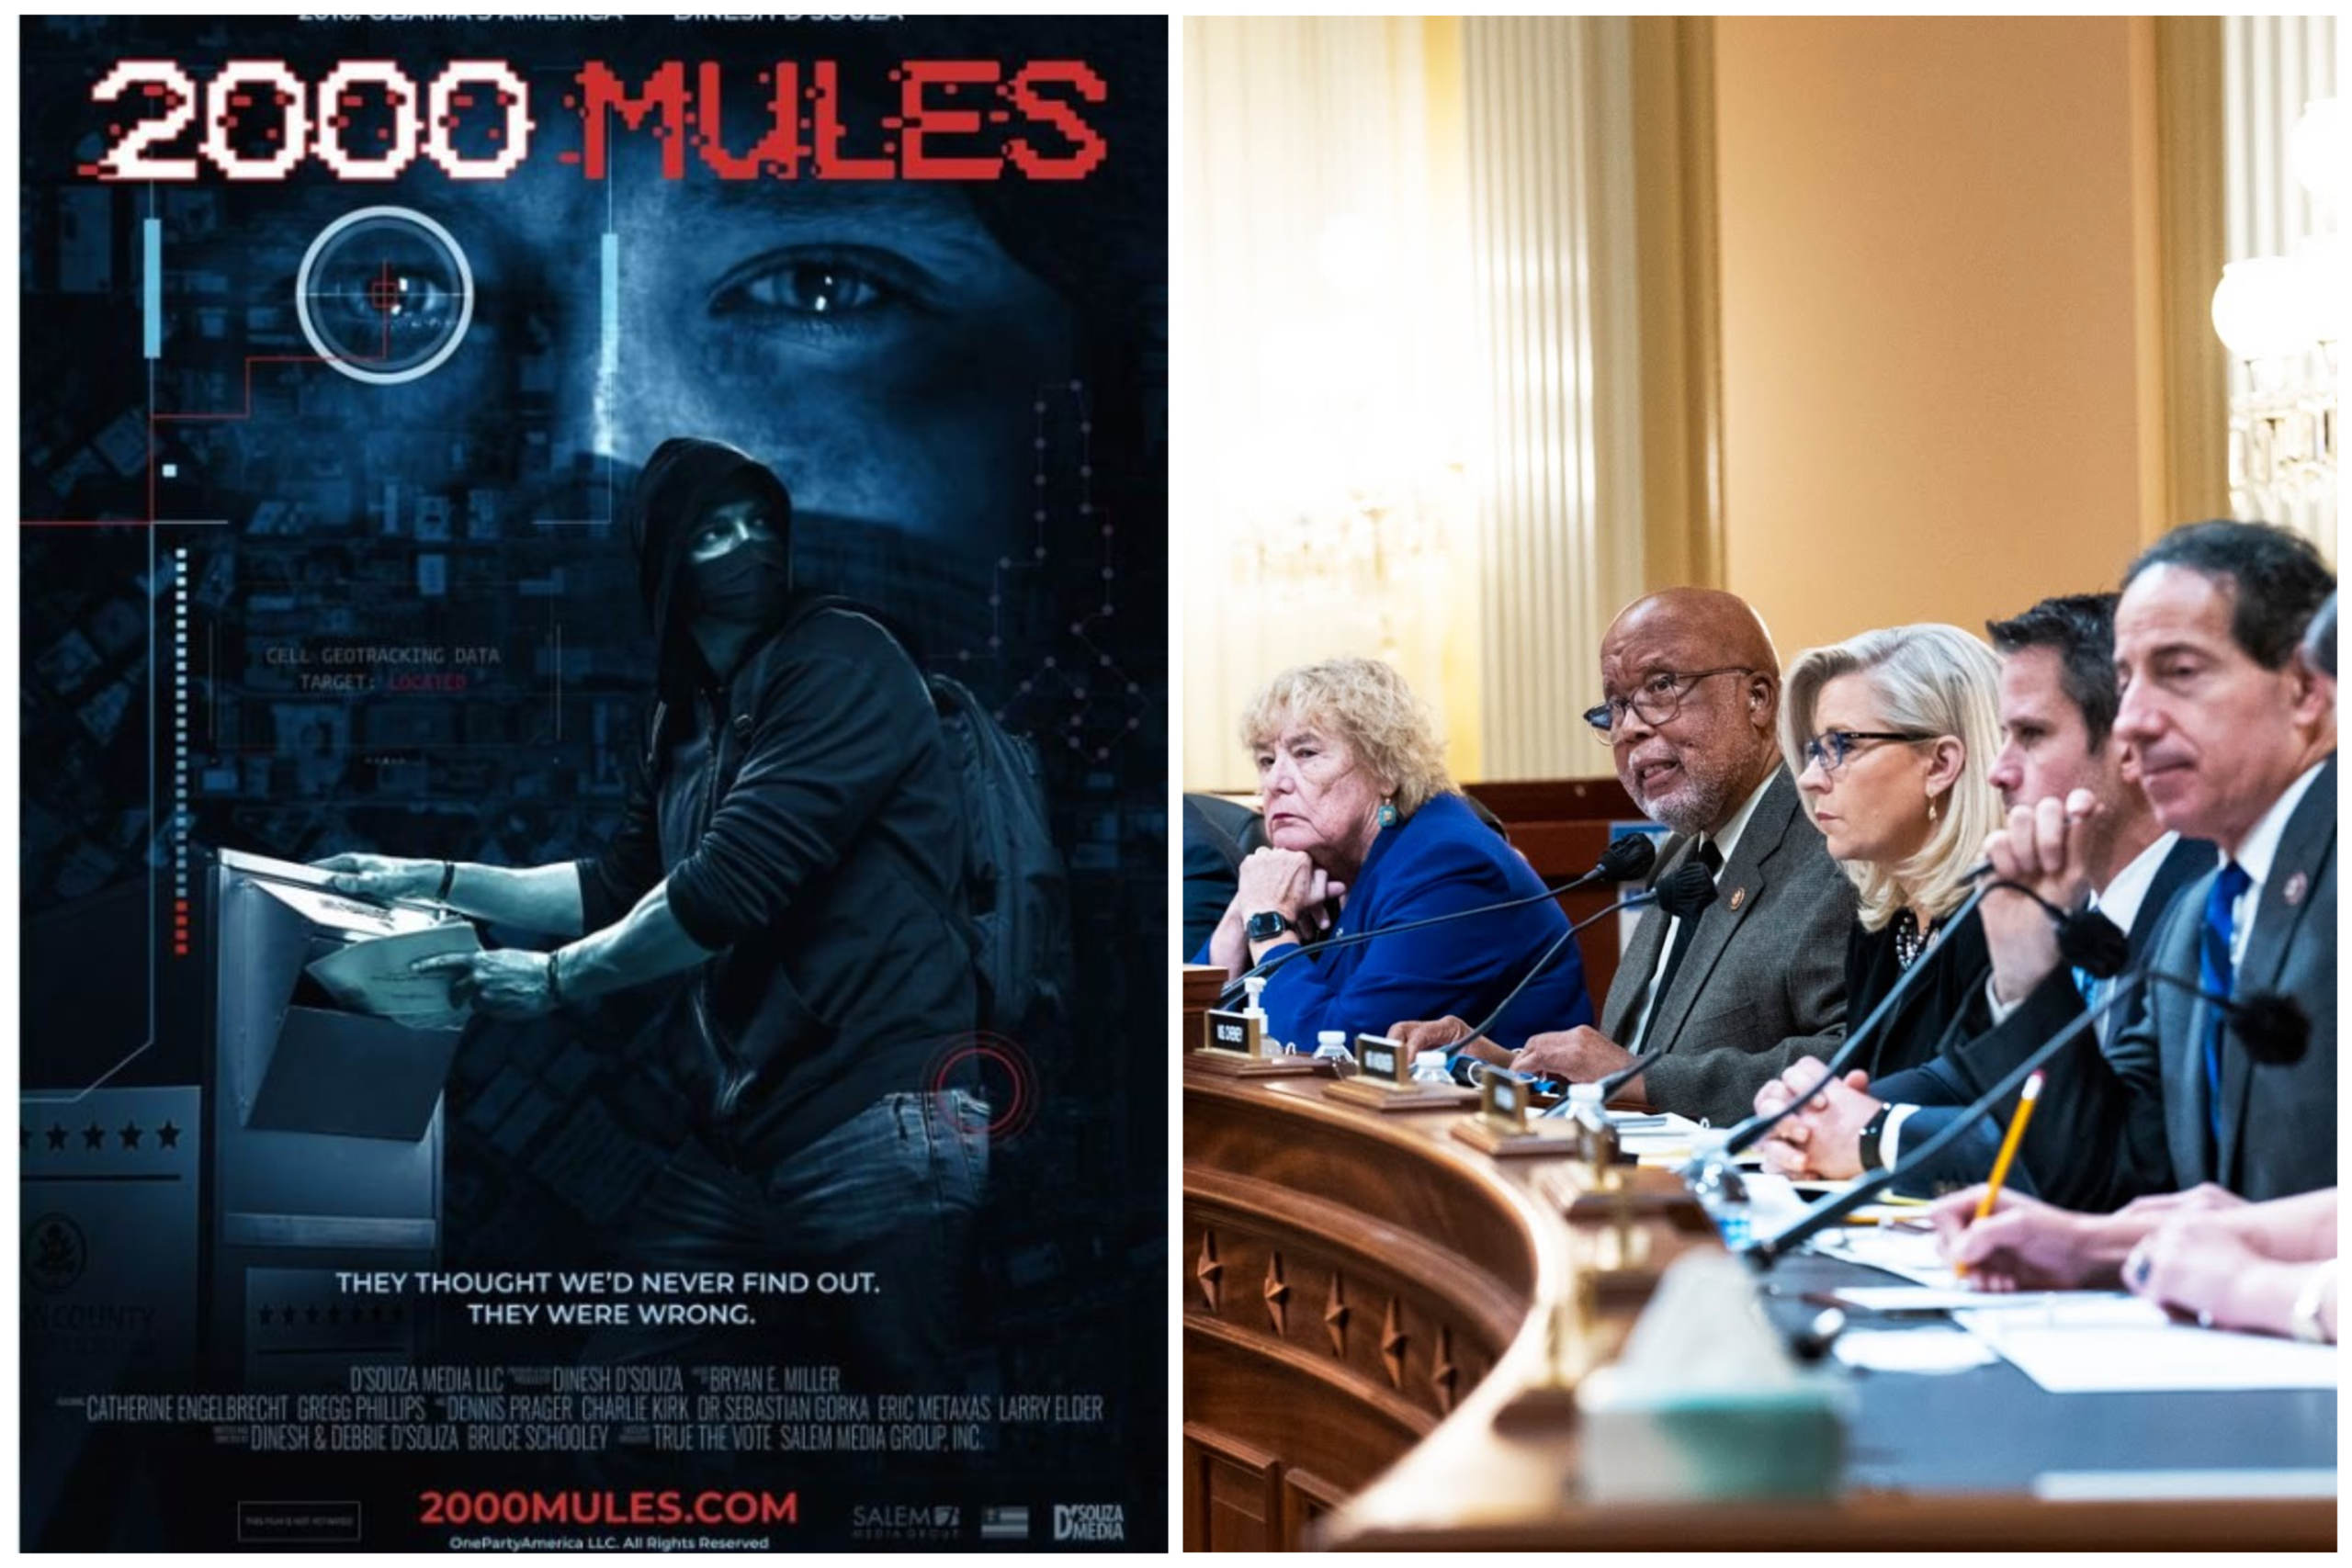  Dinesh D’Souza Dares Jan. 6 Committee to Air His Movie “2000 Mules” at Public Hearing and Try to Refute It